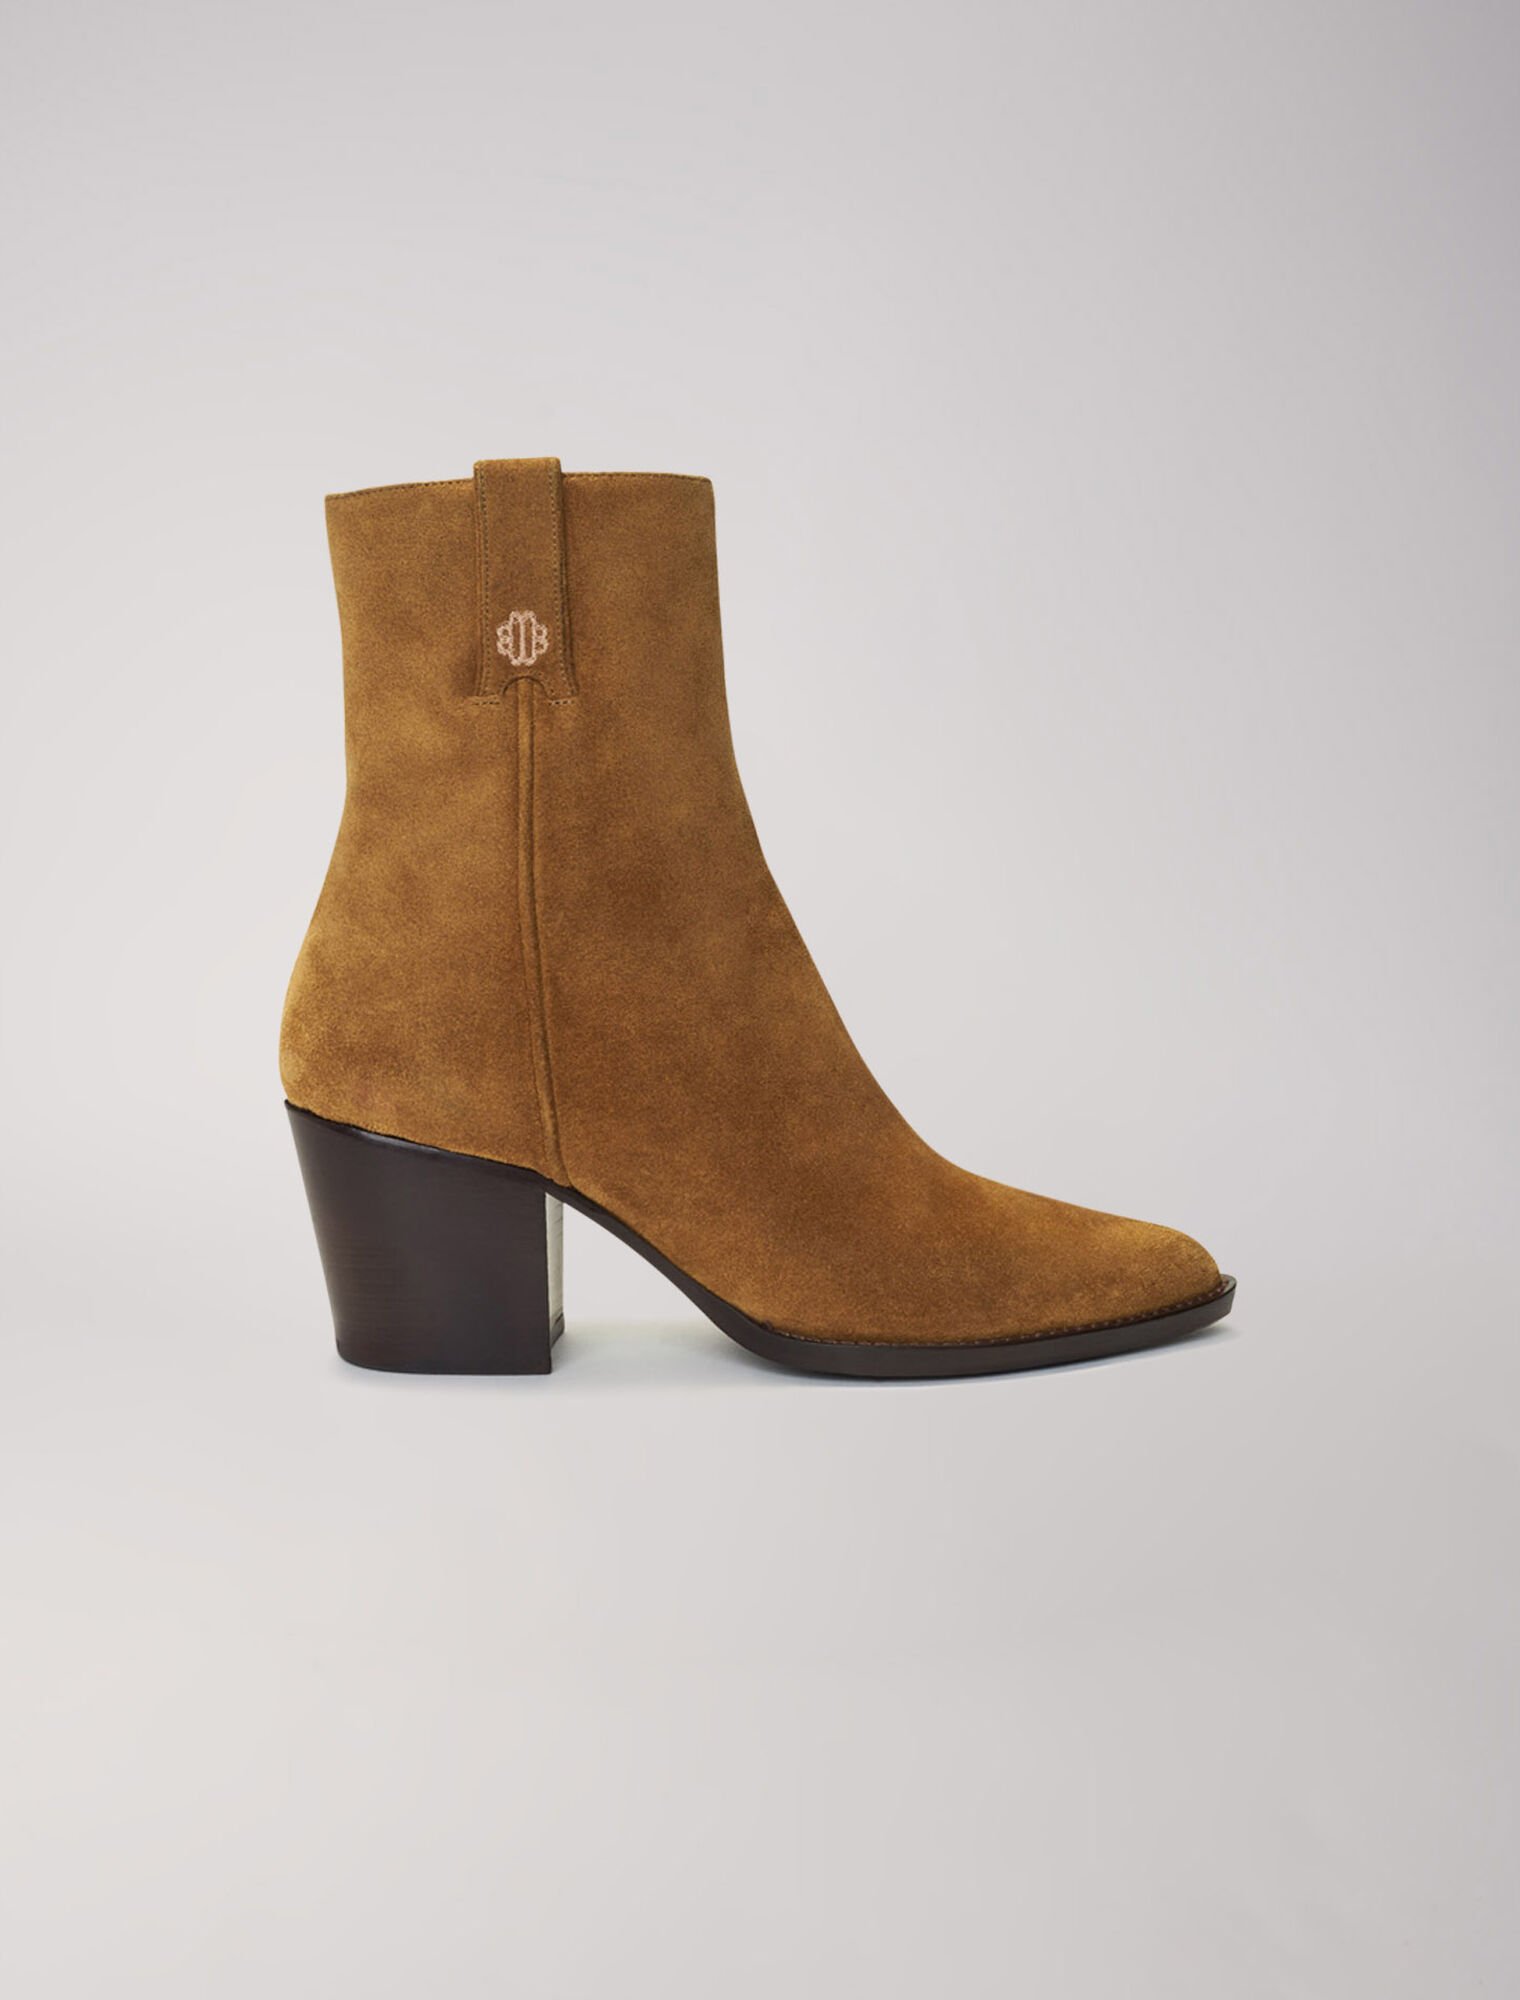 Cowboy boots in camel suede leather